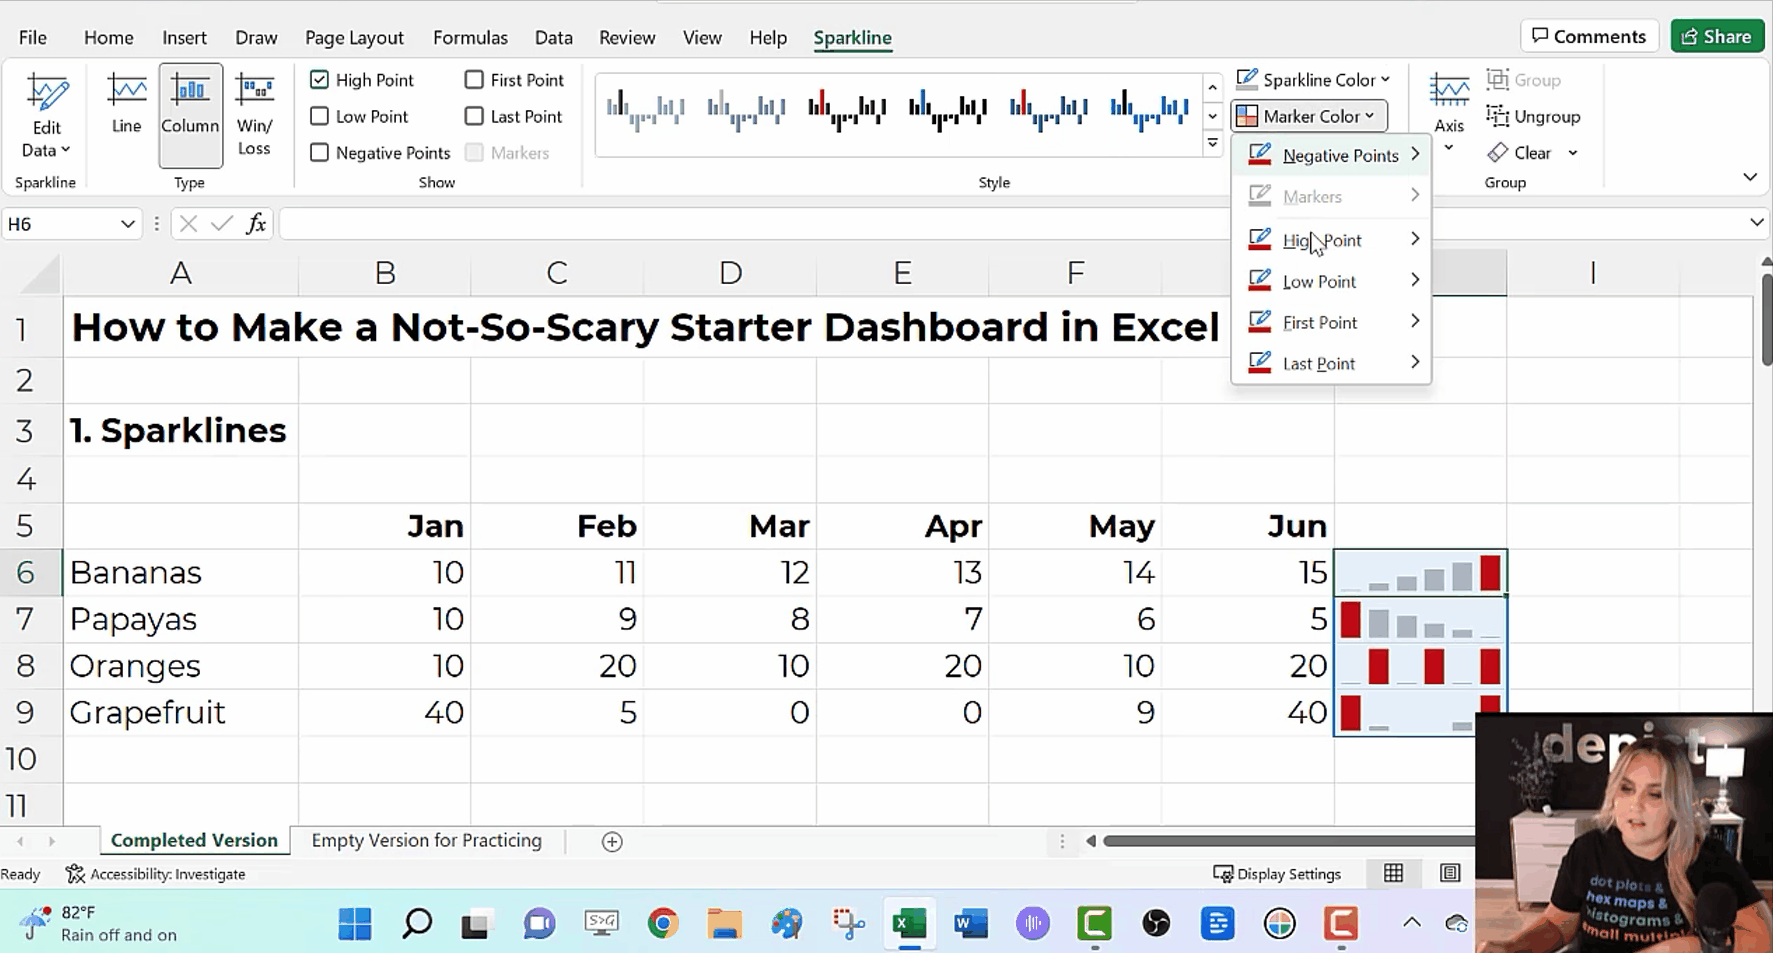 Ann K. Emery teaches you how to make a starter dashboard in Excel with sparklines, data bars, symbol fonts, and heat tables.